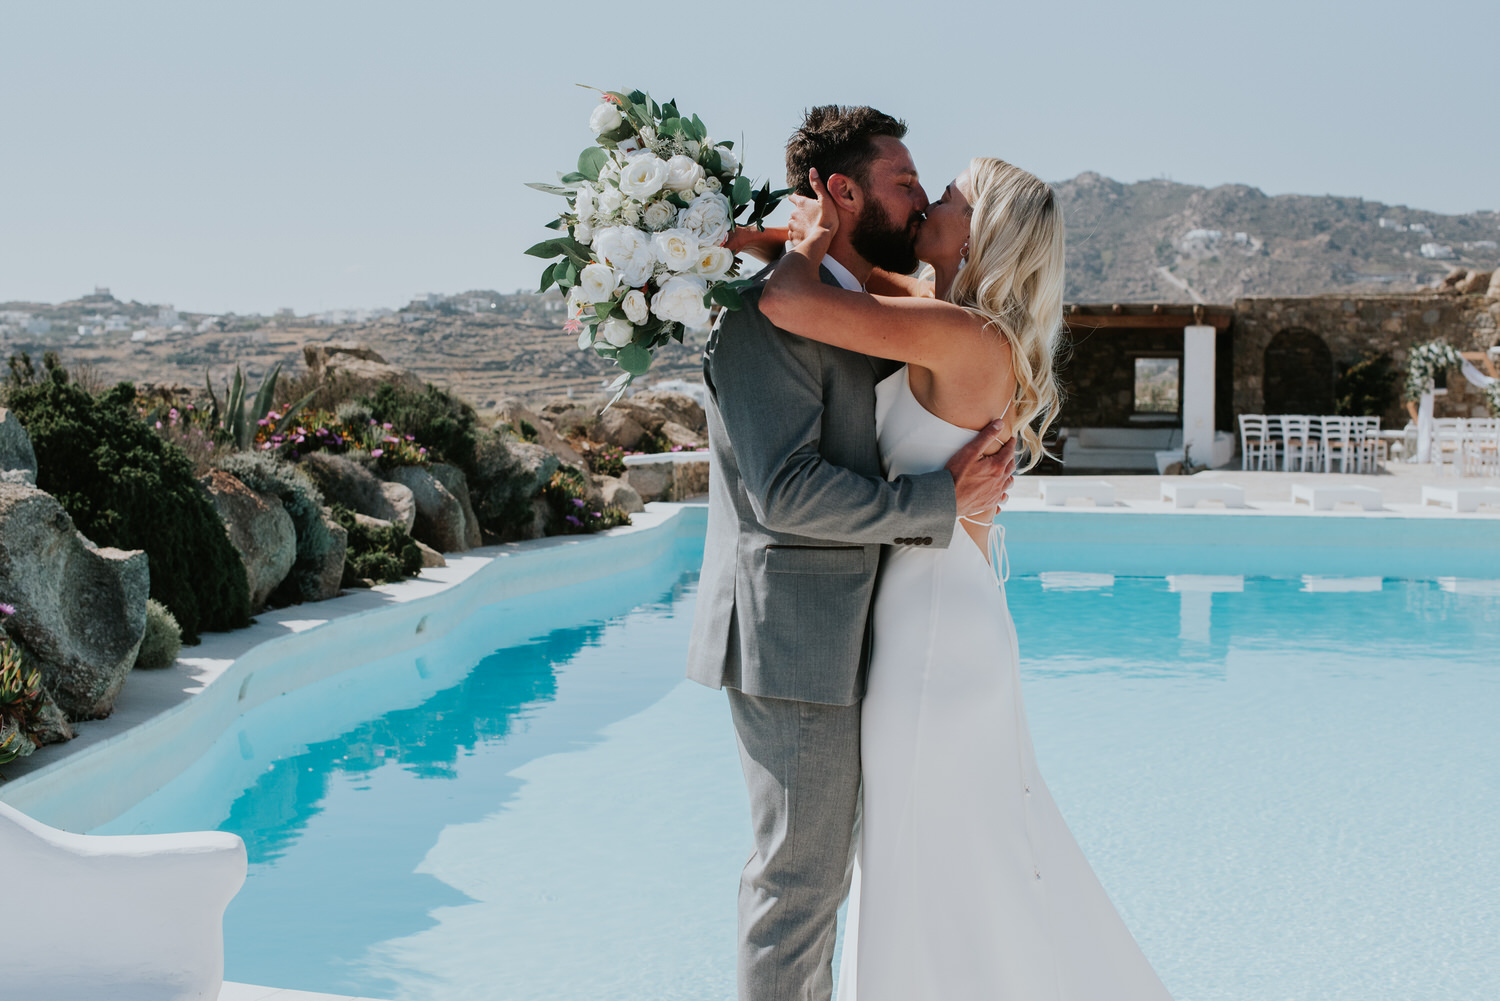 Mykonos wedding photographer: close up of bride and groom embraced in a kiss next to the pool and the rocks in the background.